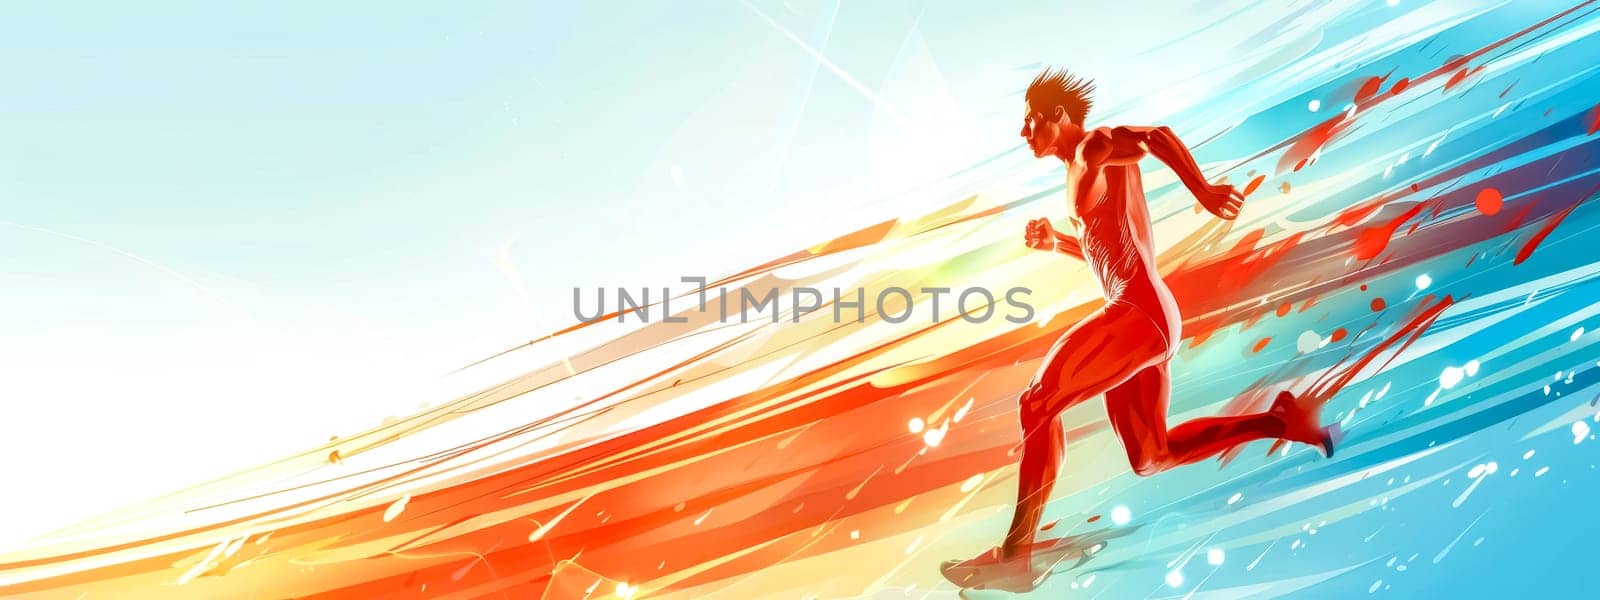 Vibrant illustration of a runner in motion with a colorful abstract background